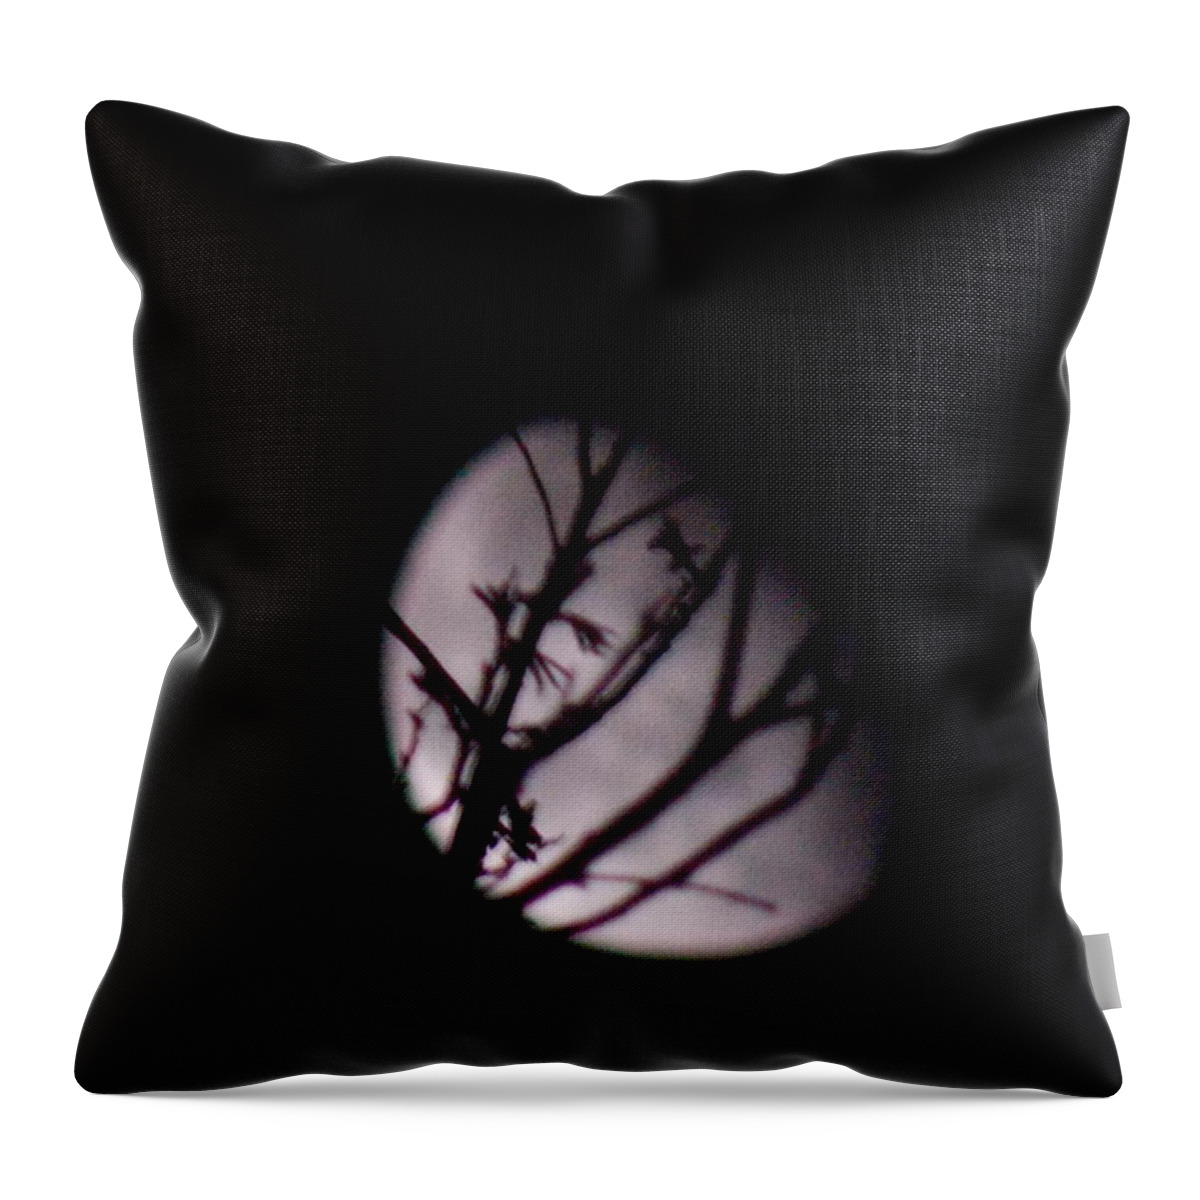 Light Throw Pillow featuring the photograph Light Of A Waning Moon by Virginia White